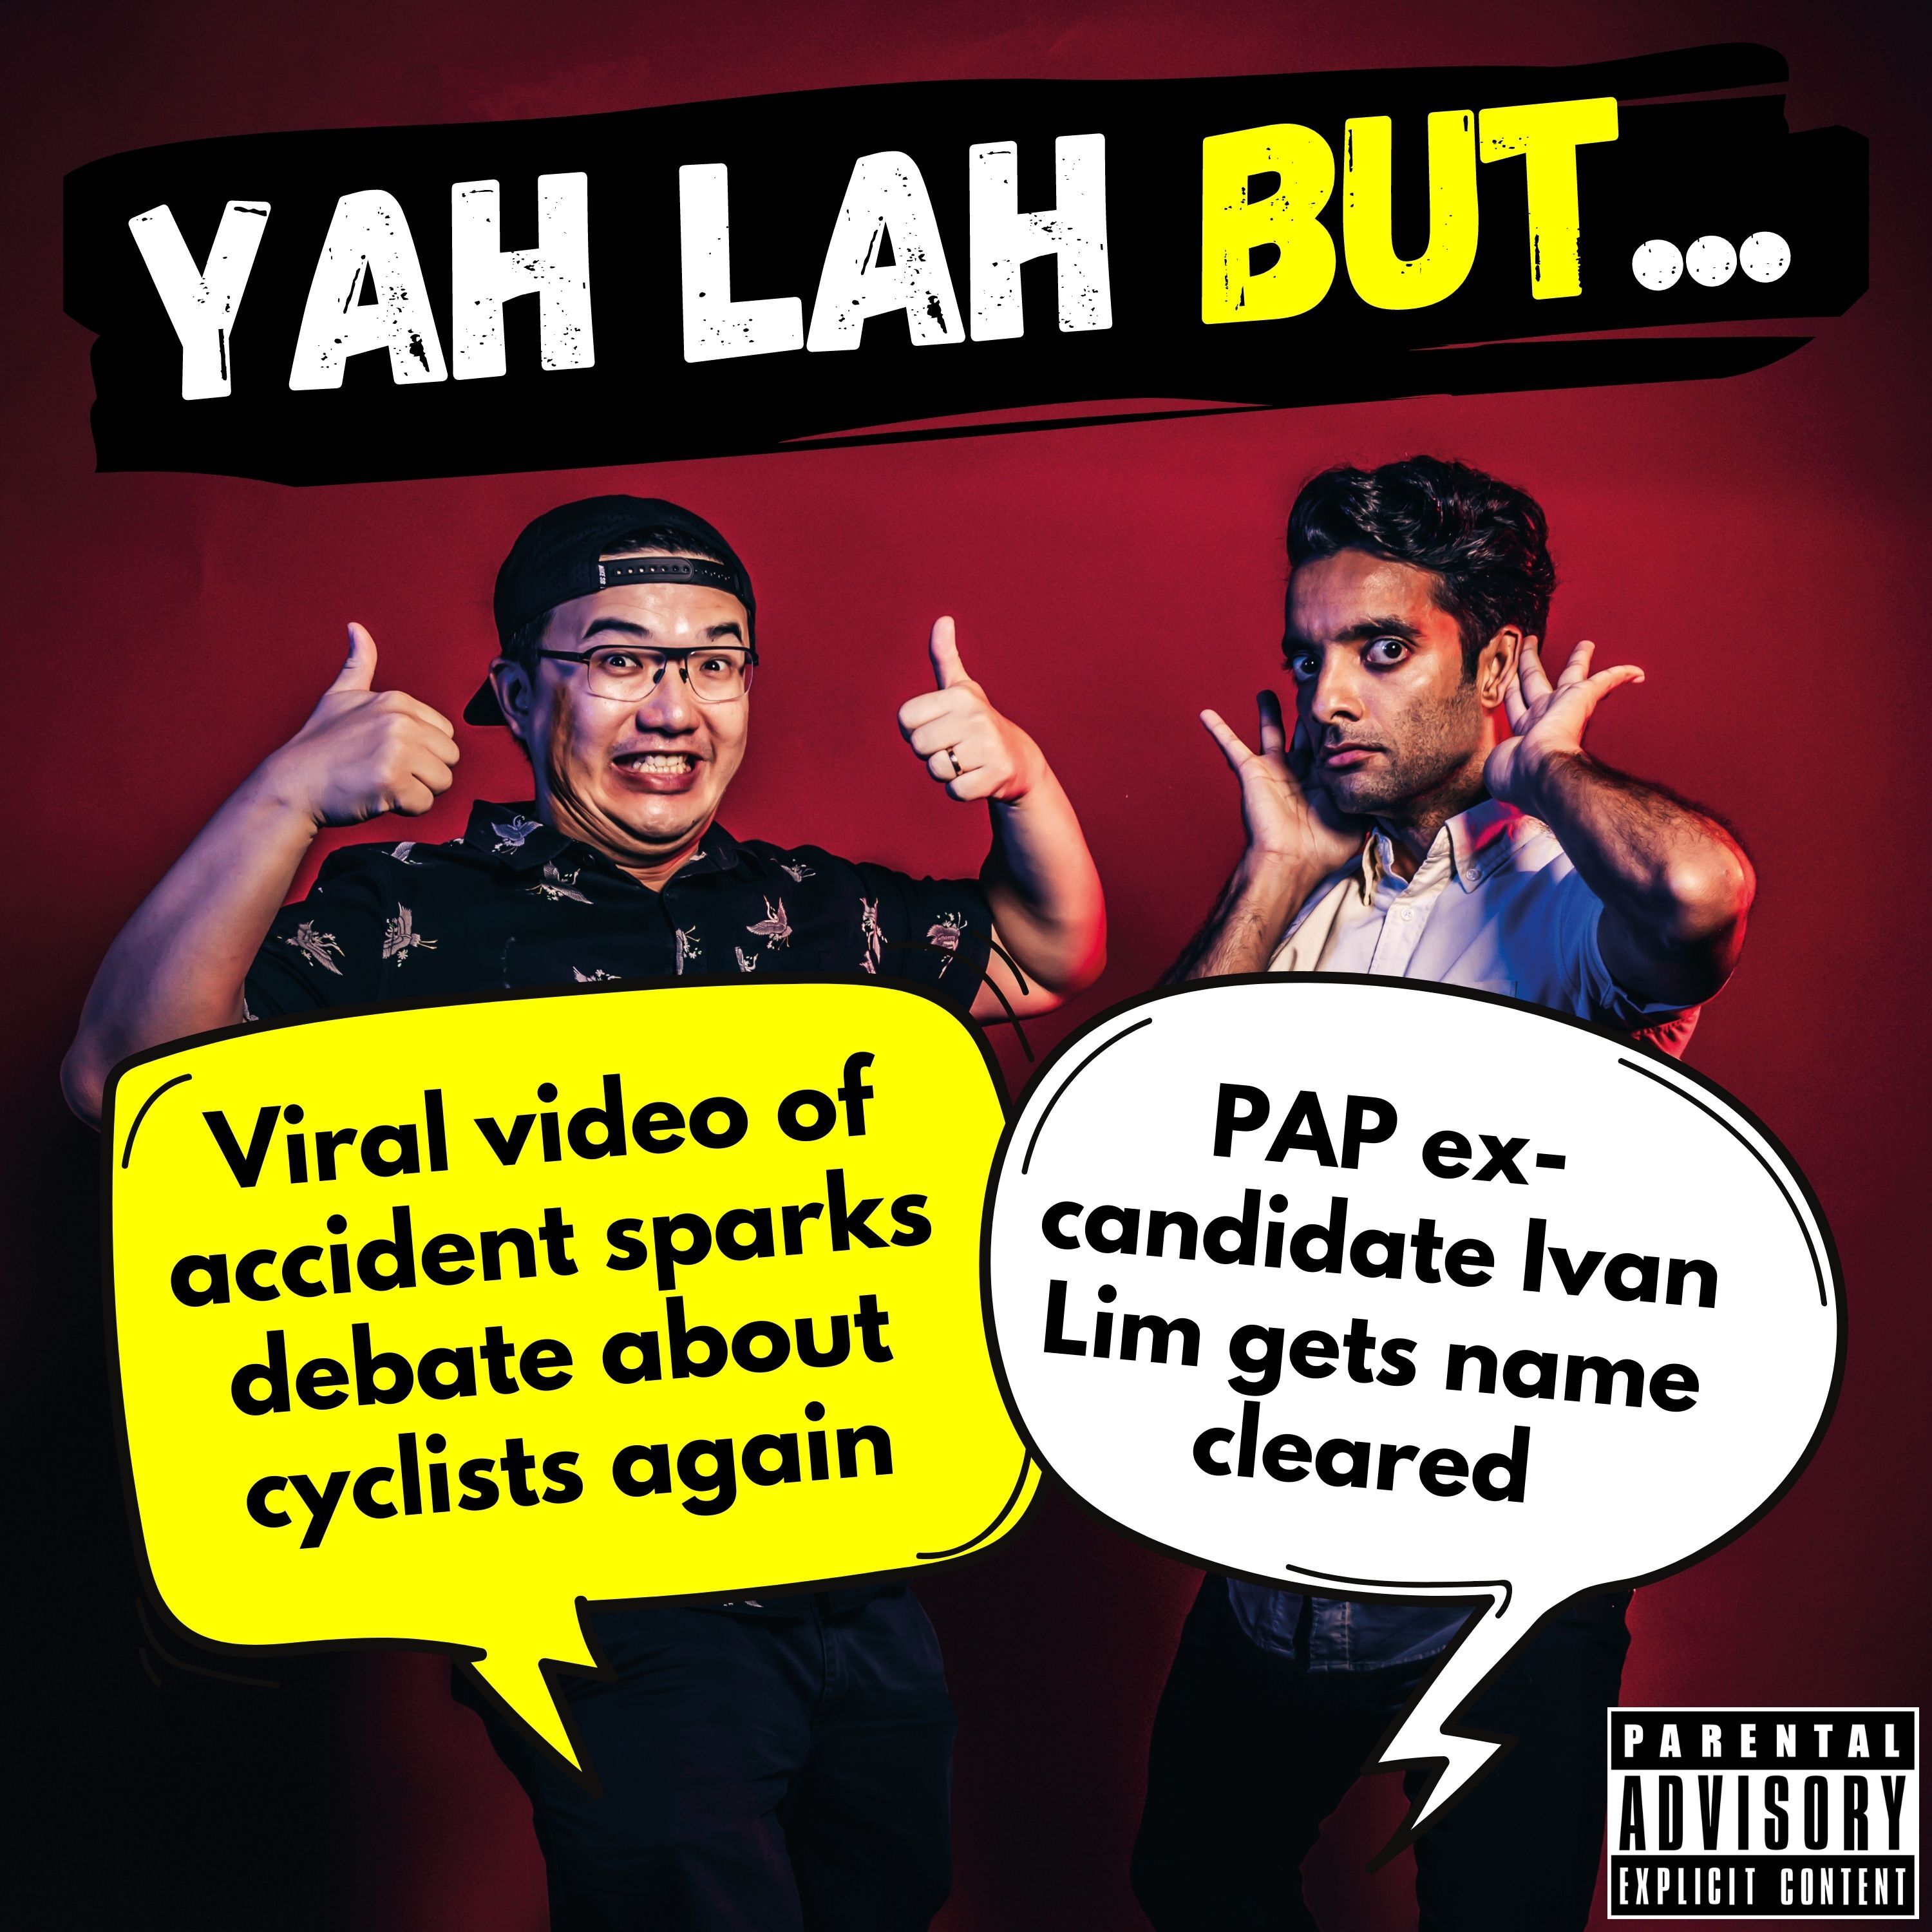 #283 - Viral video of accident sparks debate about cyclists again & PAP ex-candidate Ivan Lim gets name cleared